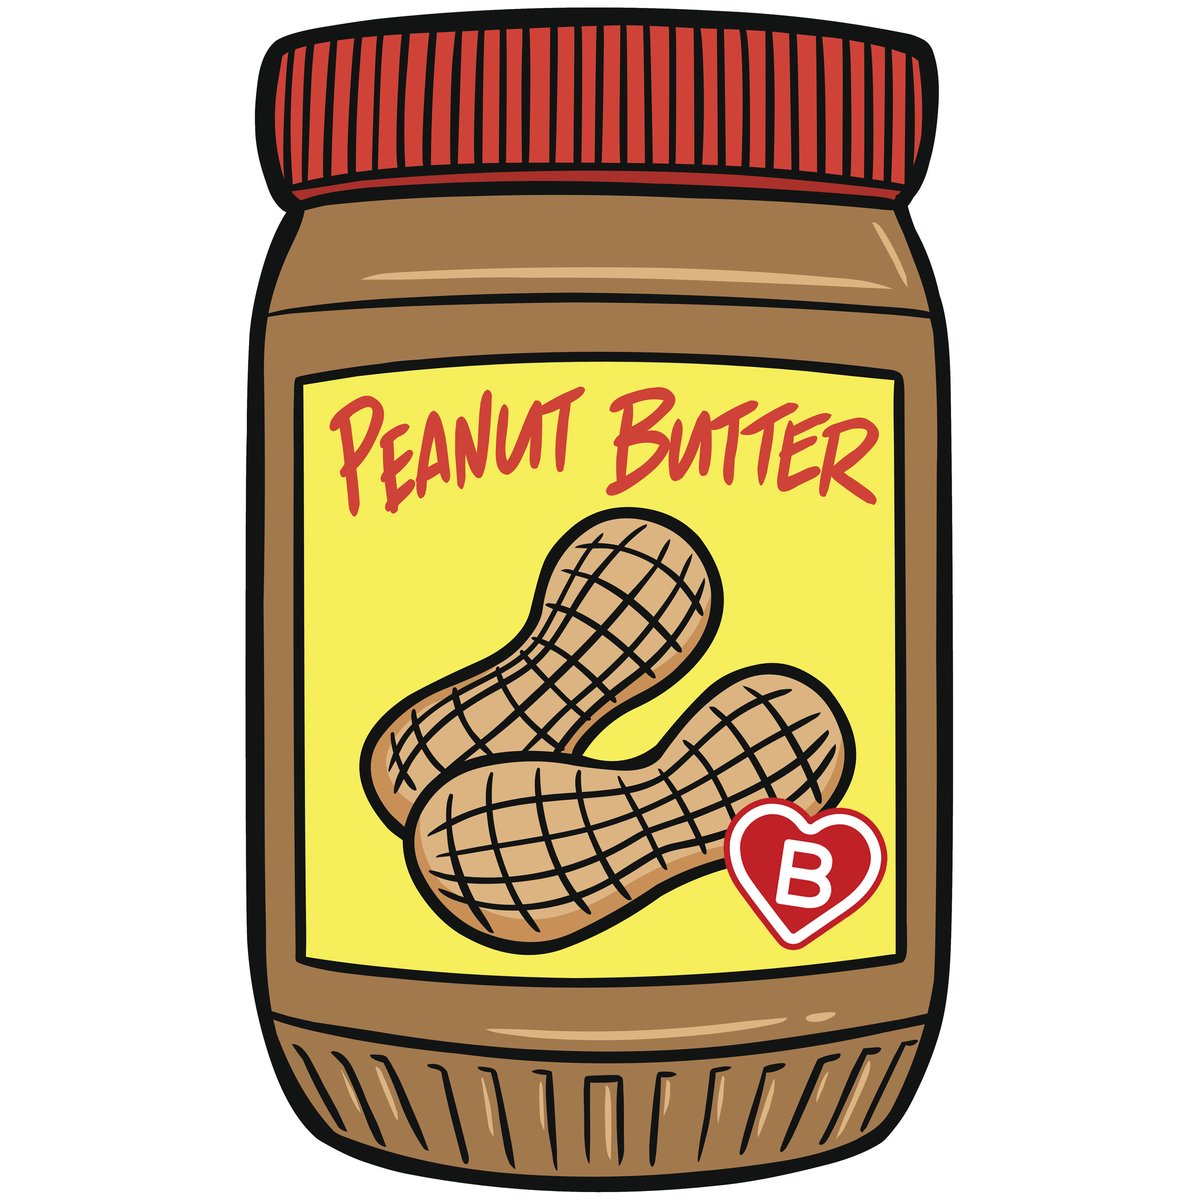 Peanut butter was first introduced at the St. Louis World’s Fair in 1904. 